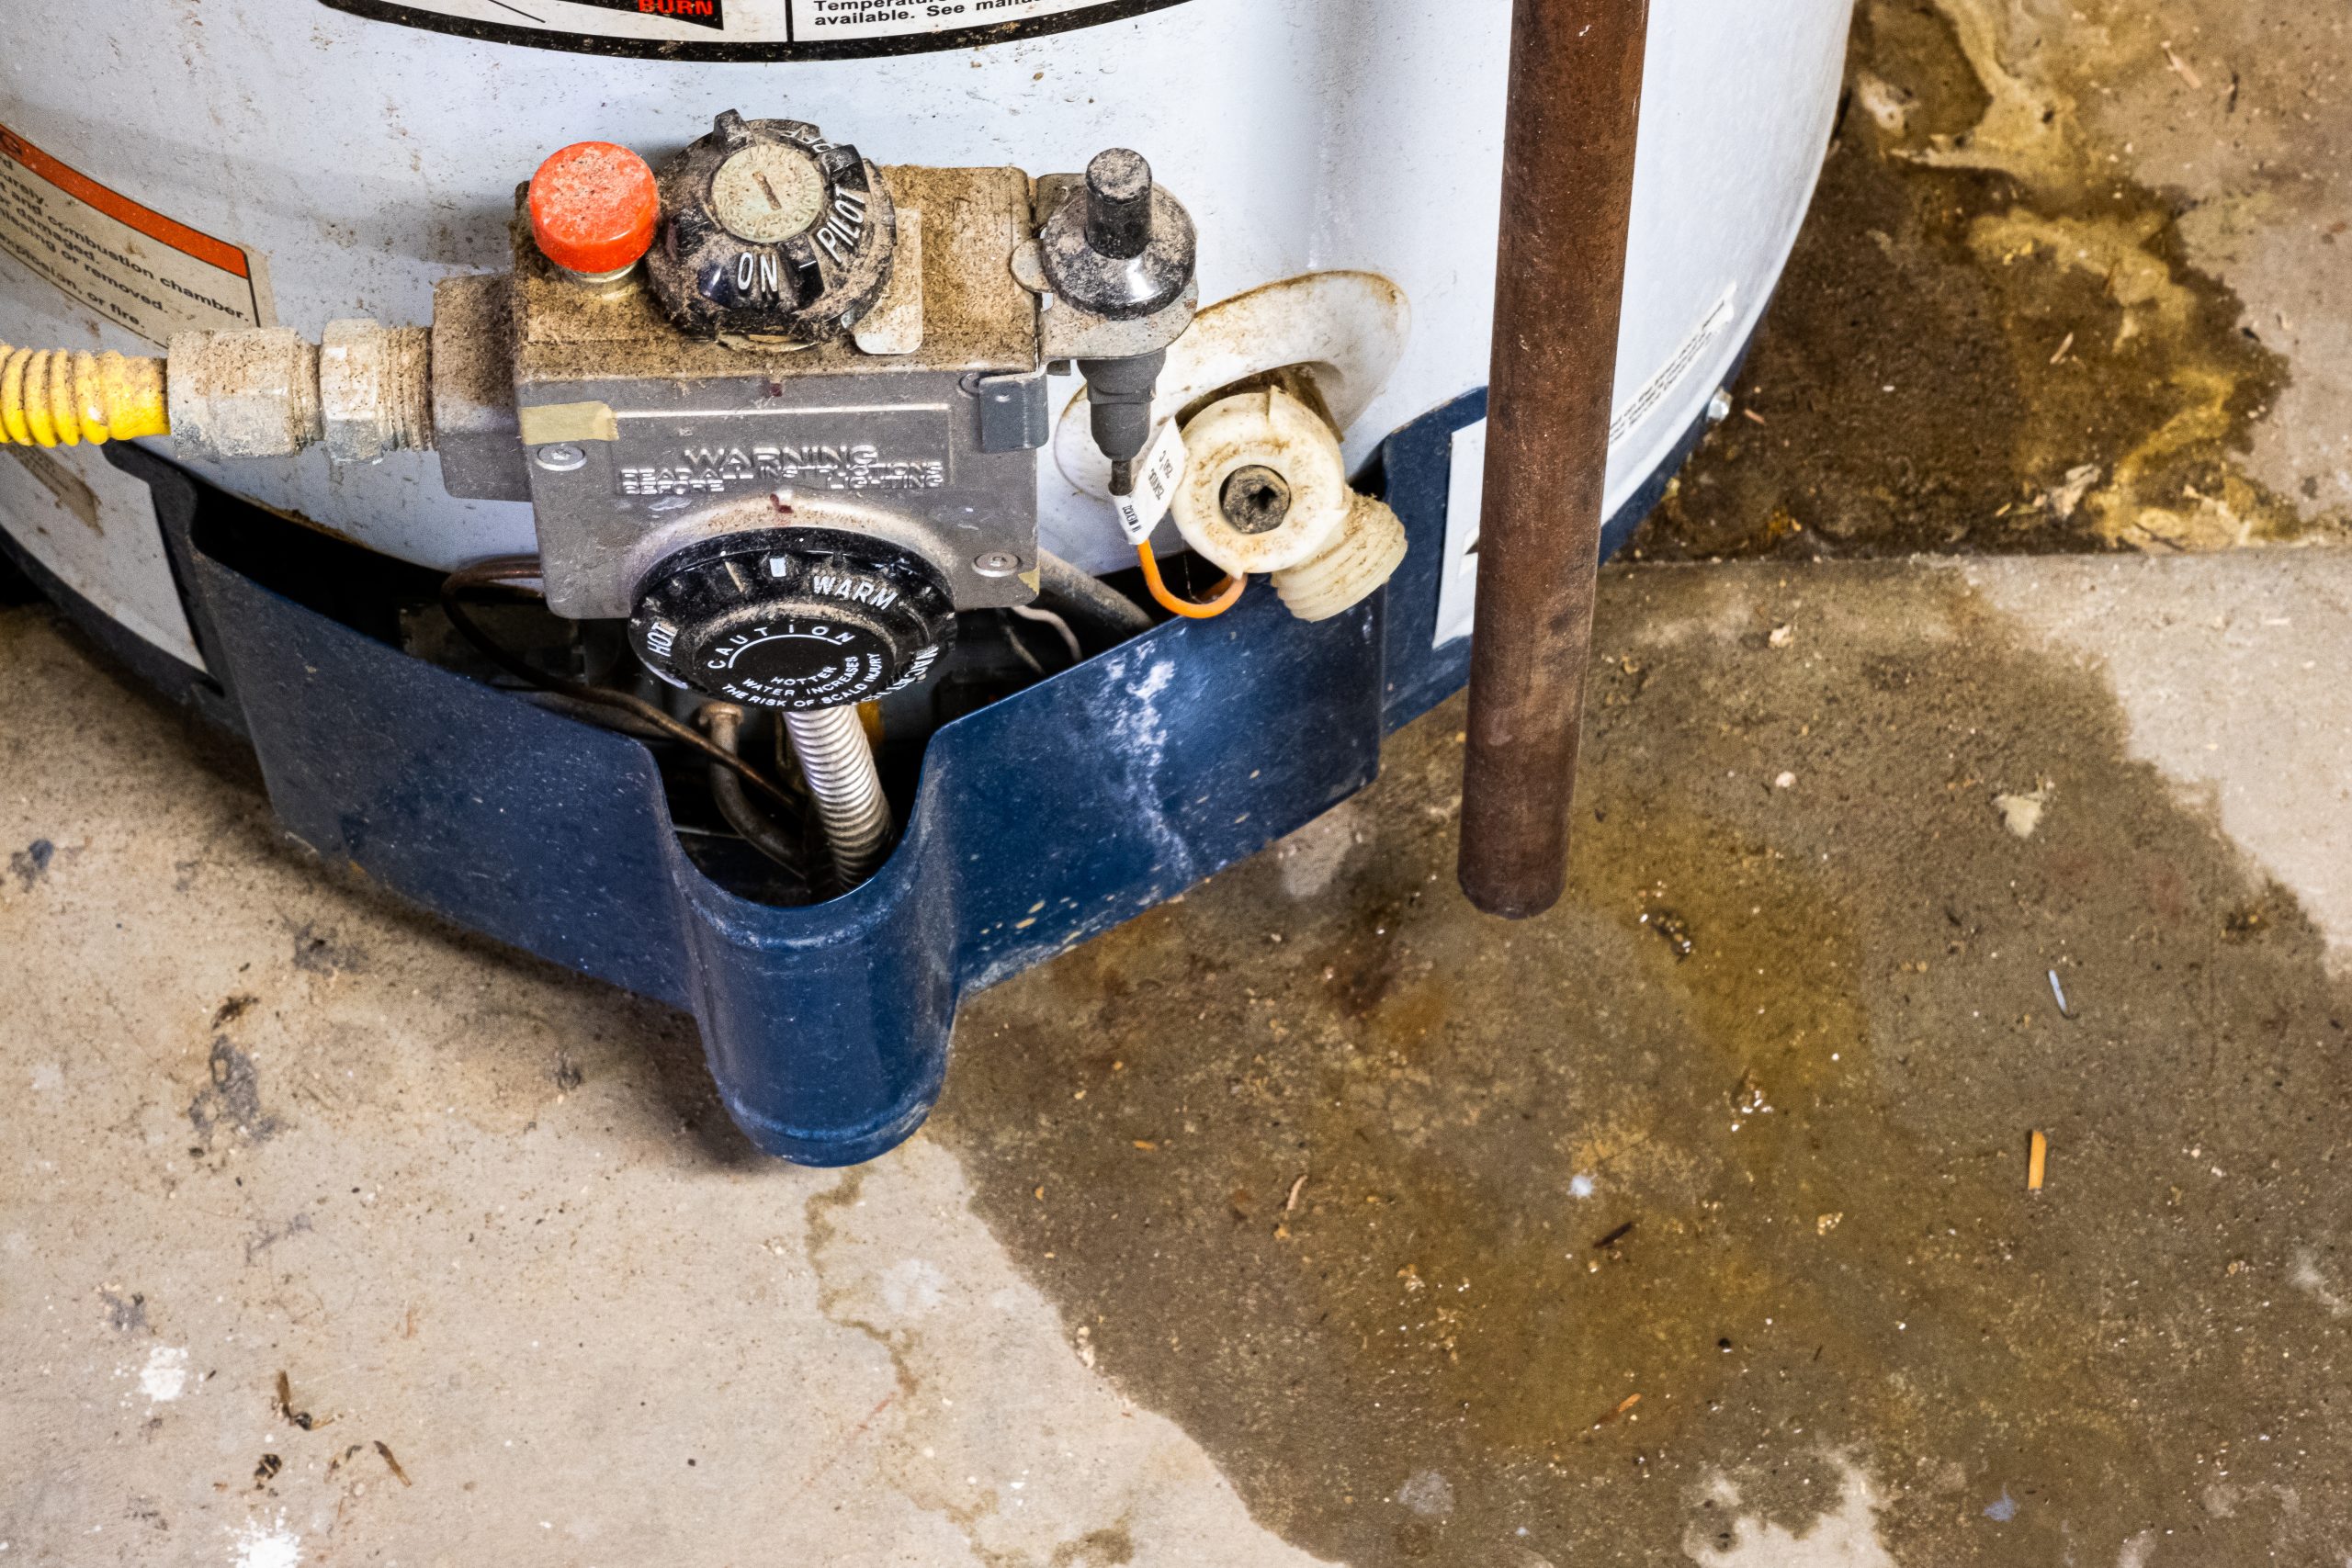 Stop water heater leaking! Learn how to detect, prevent, and fix leaks. Expert advice for a dry home with Major League Plumbing!